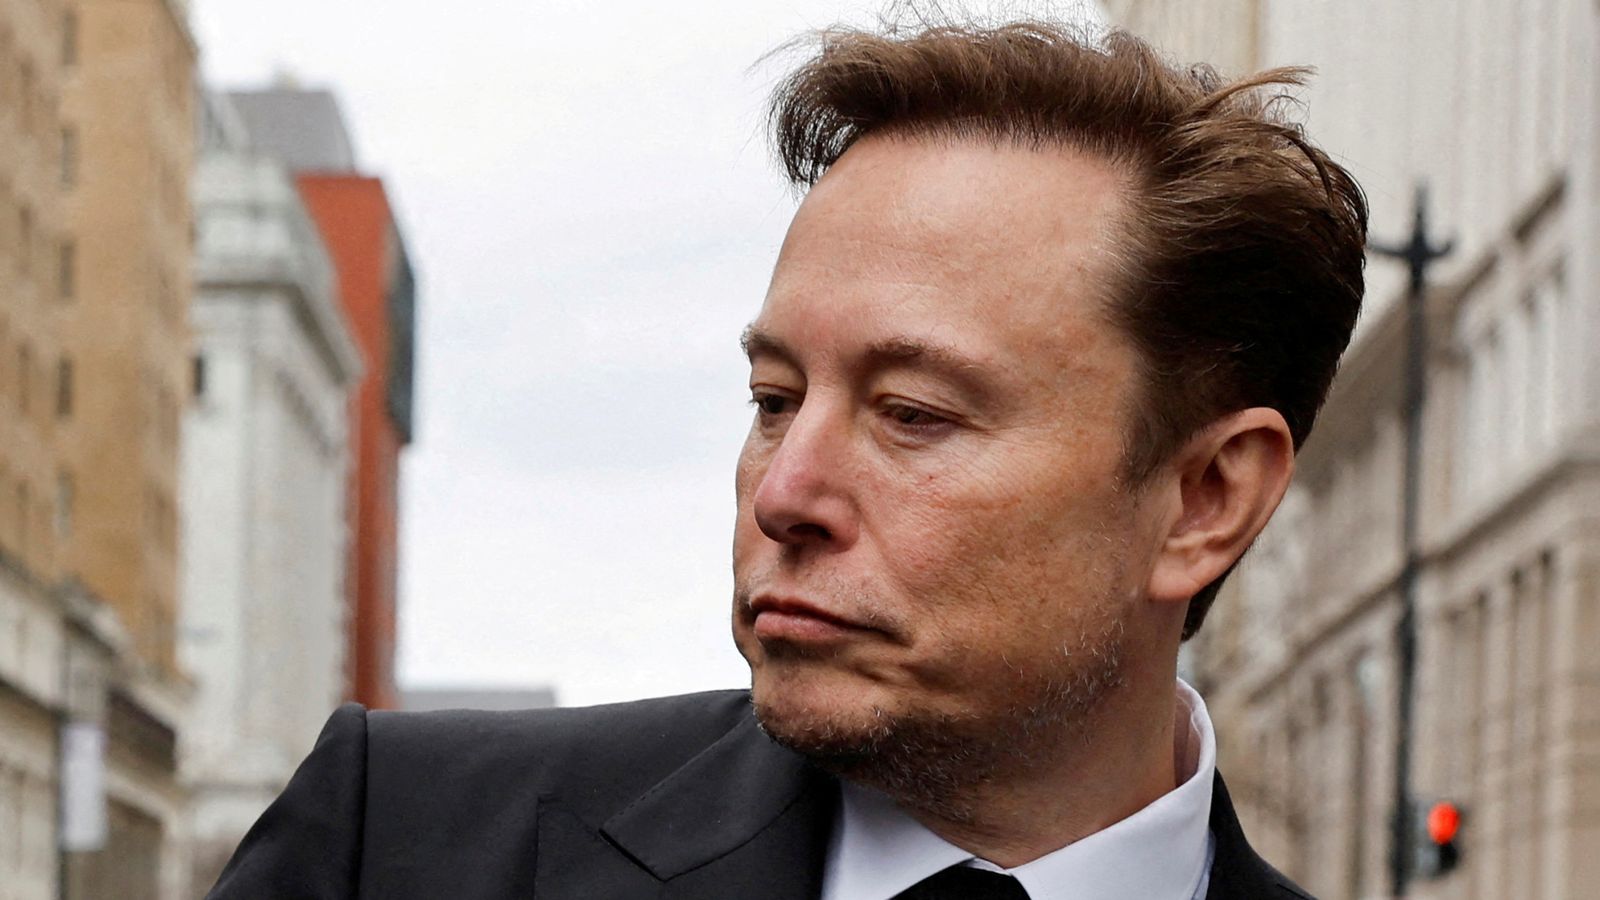 Elon Musk threatens to sue Microsoft claiming it used Twitter data without permission